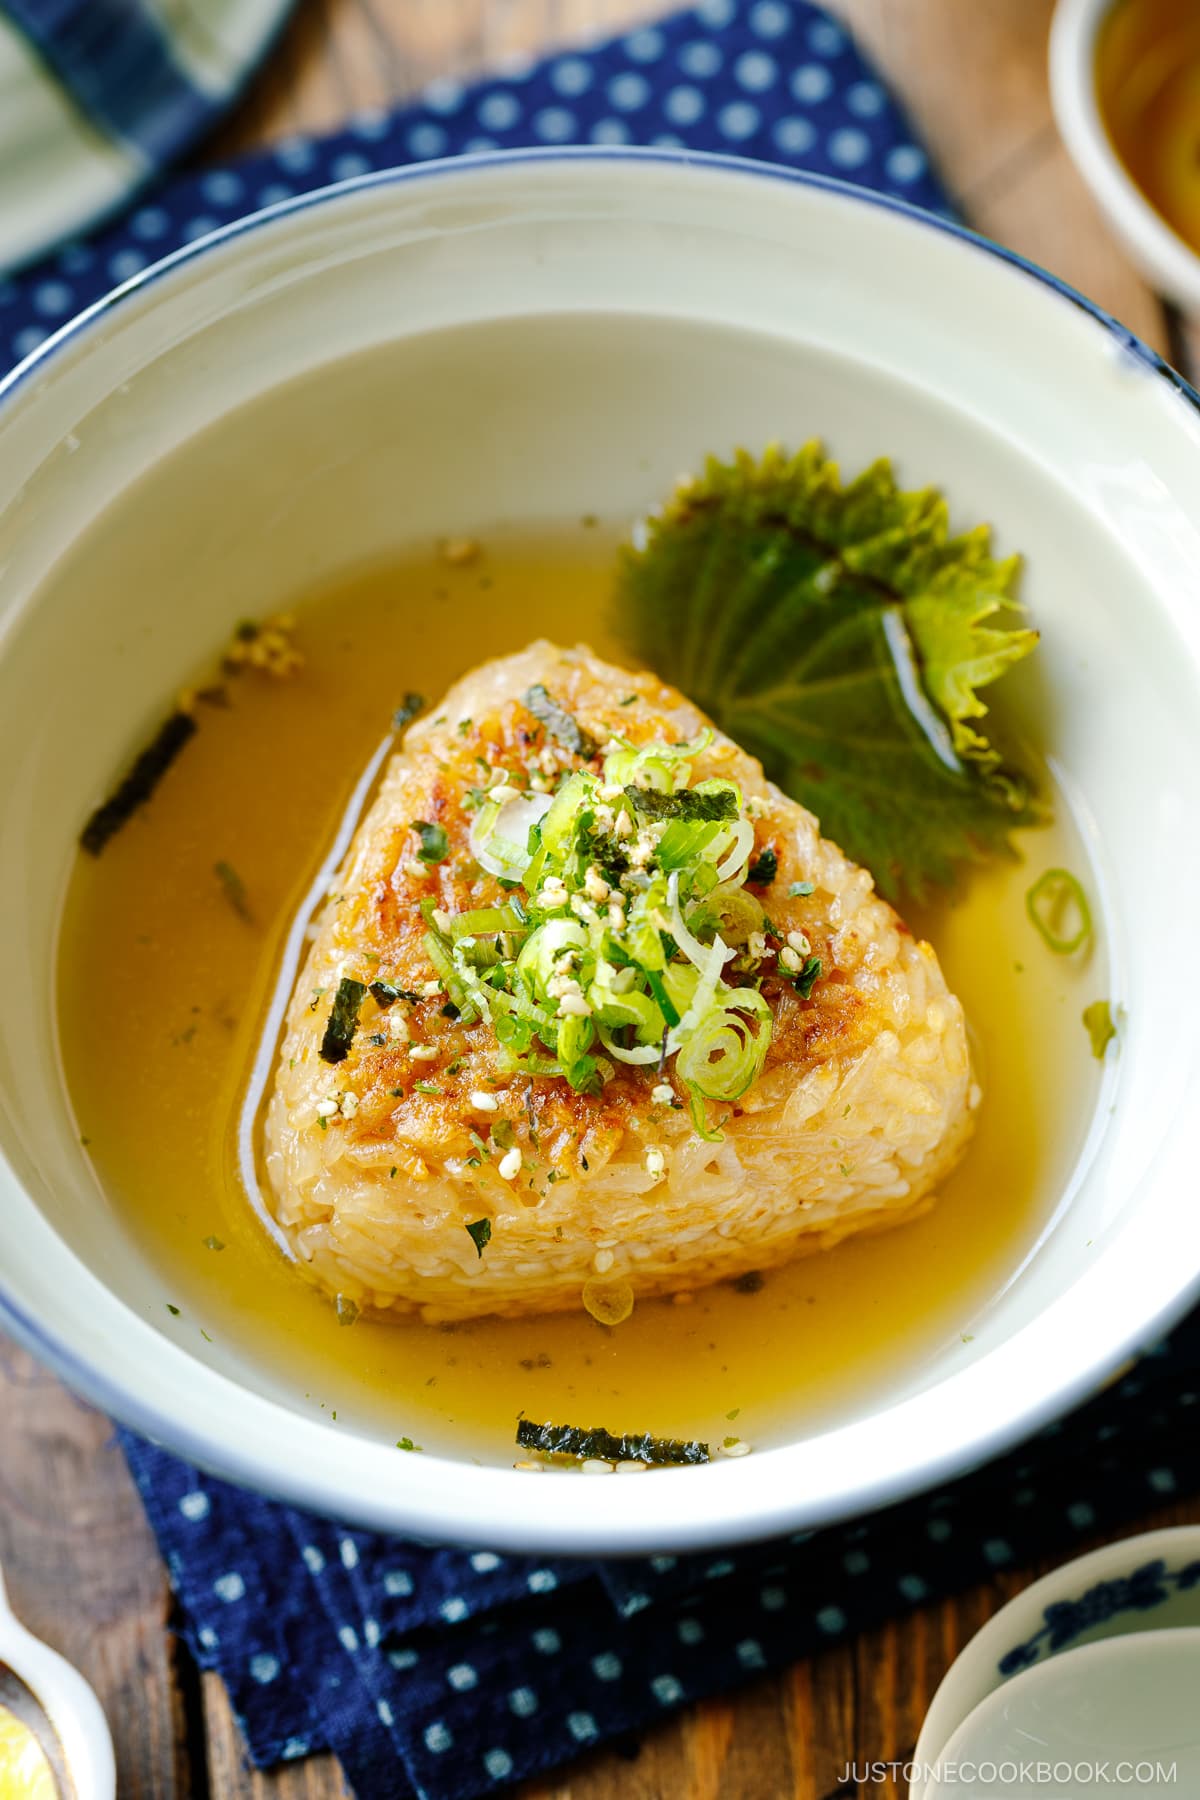 A donburi bowl containing a Japanese grilled rice ball in a flavorful dashi broth, topped with green onions and furikake rice seasoning.